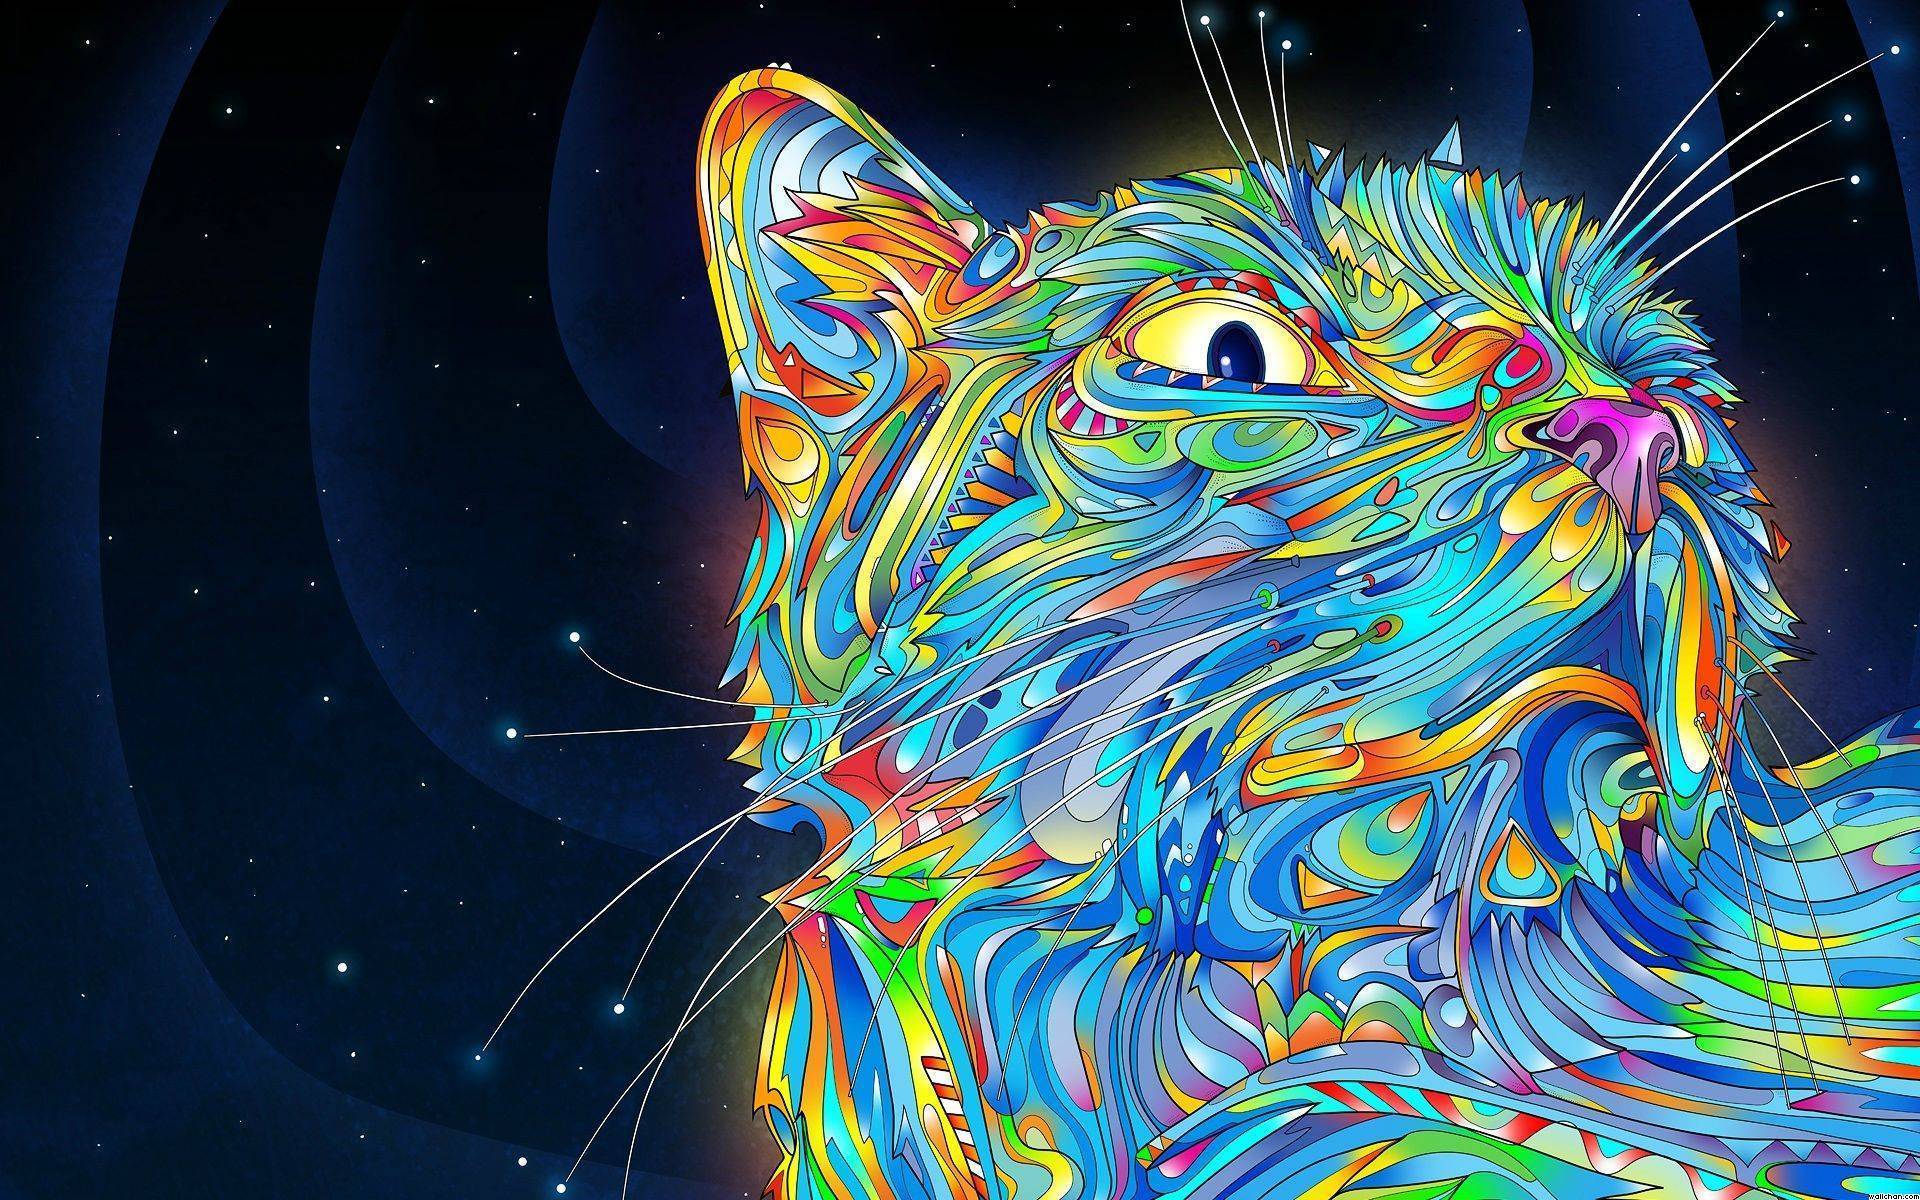 And heres my collection of trippy cat gifs - Album on Imgur